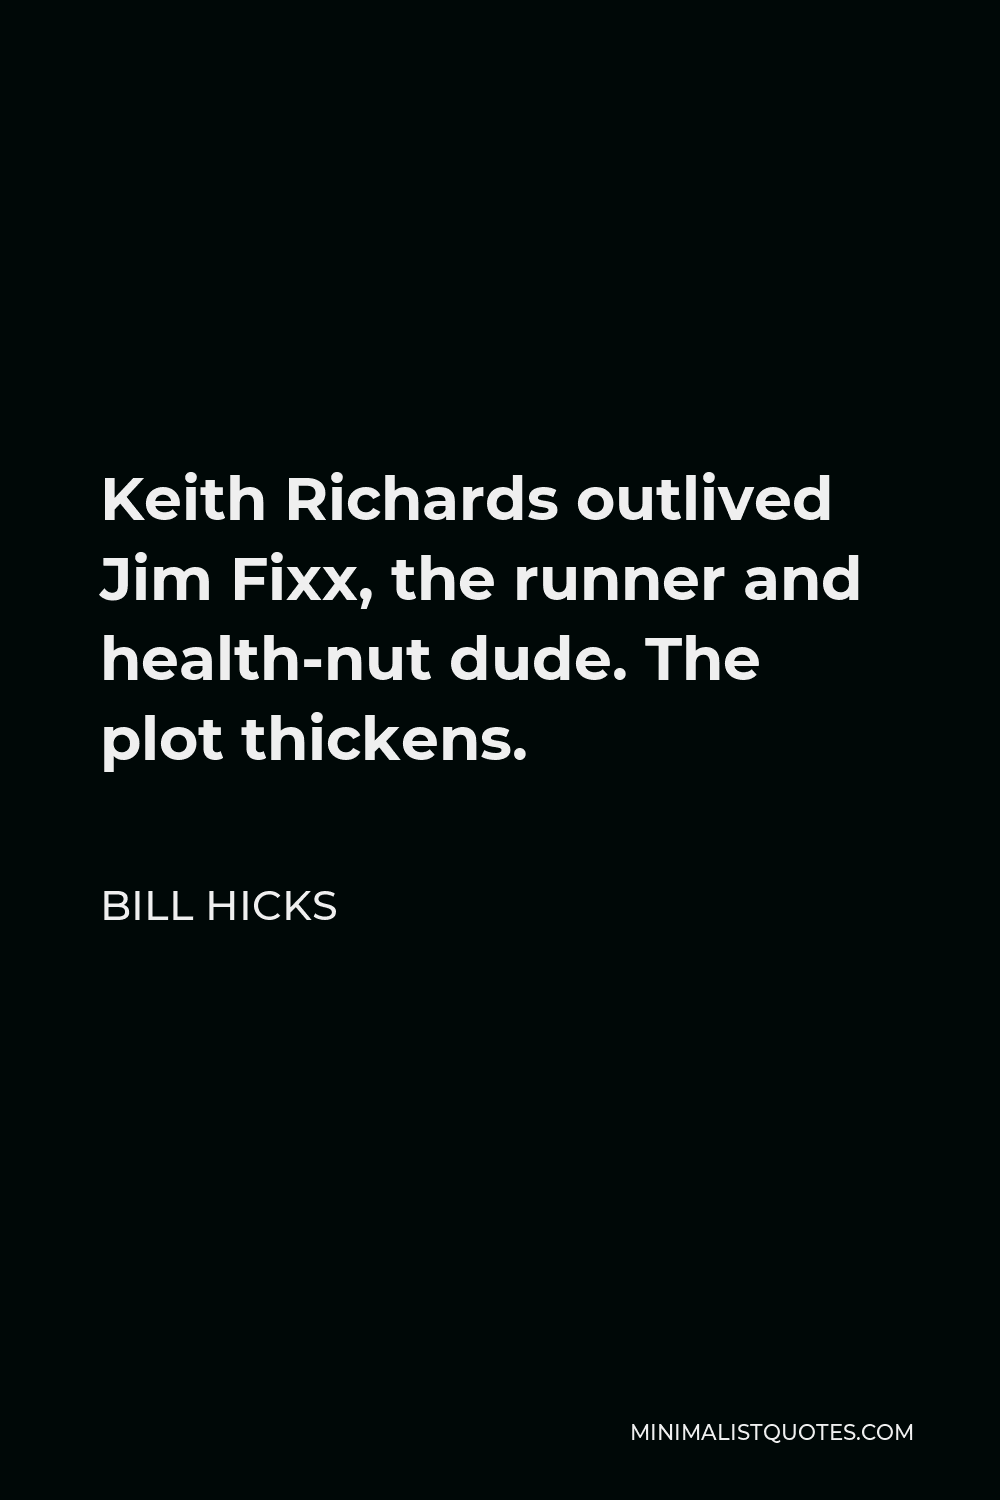 Bill Hicks Quote - Keith Richards outlived Jim Fixx, the runner and health-nut dude. The plot thickens.